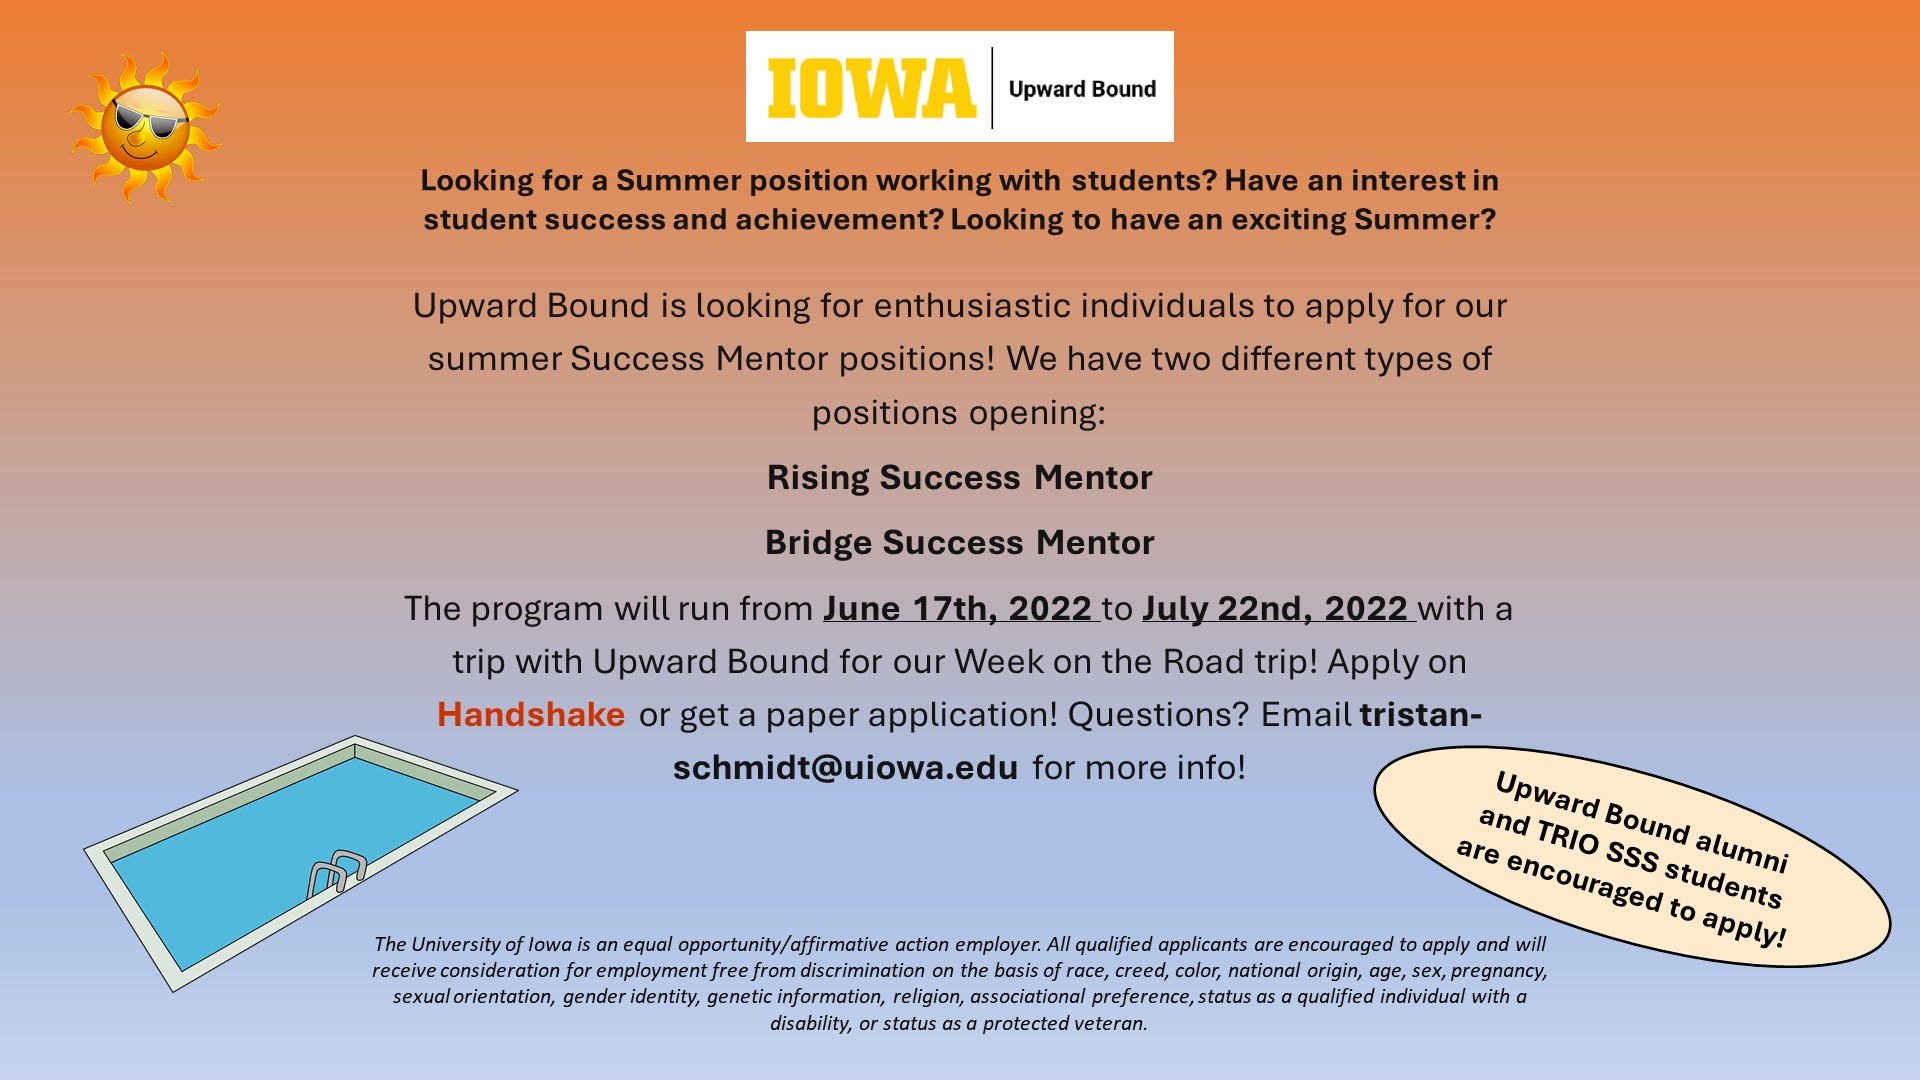 Cartoon drawings of a sun wearing sunglasses and a swimming pool accompany the following text: "Looking for a Summer position working with students? Have an interest in student success and achievement? Looking to have an exciting Summer? Upward Bound is looking for enthusiastic individuals to apply for our summer Success Mentor positions! We have two different types of positions opening: Rising Success Mentor Bridge Success Mentor The program will run from June 17th, 2022 to July 22nd, 2022 with a trip with Upward Bound for our Week on the Road trip! Apply on Handshake or get a paper application! Questions? Email tristan-schmidt@uiowa.edu for more info! Upward Bound alumni and TRIO SSS students are encouraged to apply! The University of Iowa is an equal opportunity/affirmative action employer. All qualified applicants are encouraged to apply and will receive consideration for employment free from discrimination on the basis of race, creed, color, national origin, age, sex, pregnancy, sexual orientation, gender identity, genetic information, religion, associational preference, status as a qualified individual with a disability, or status as a protected veteran."